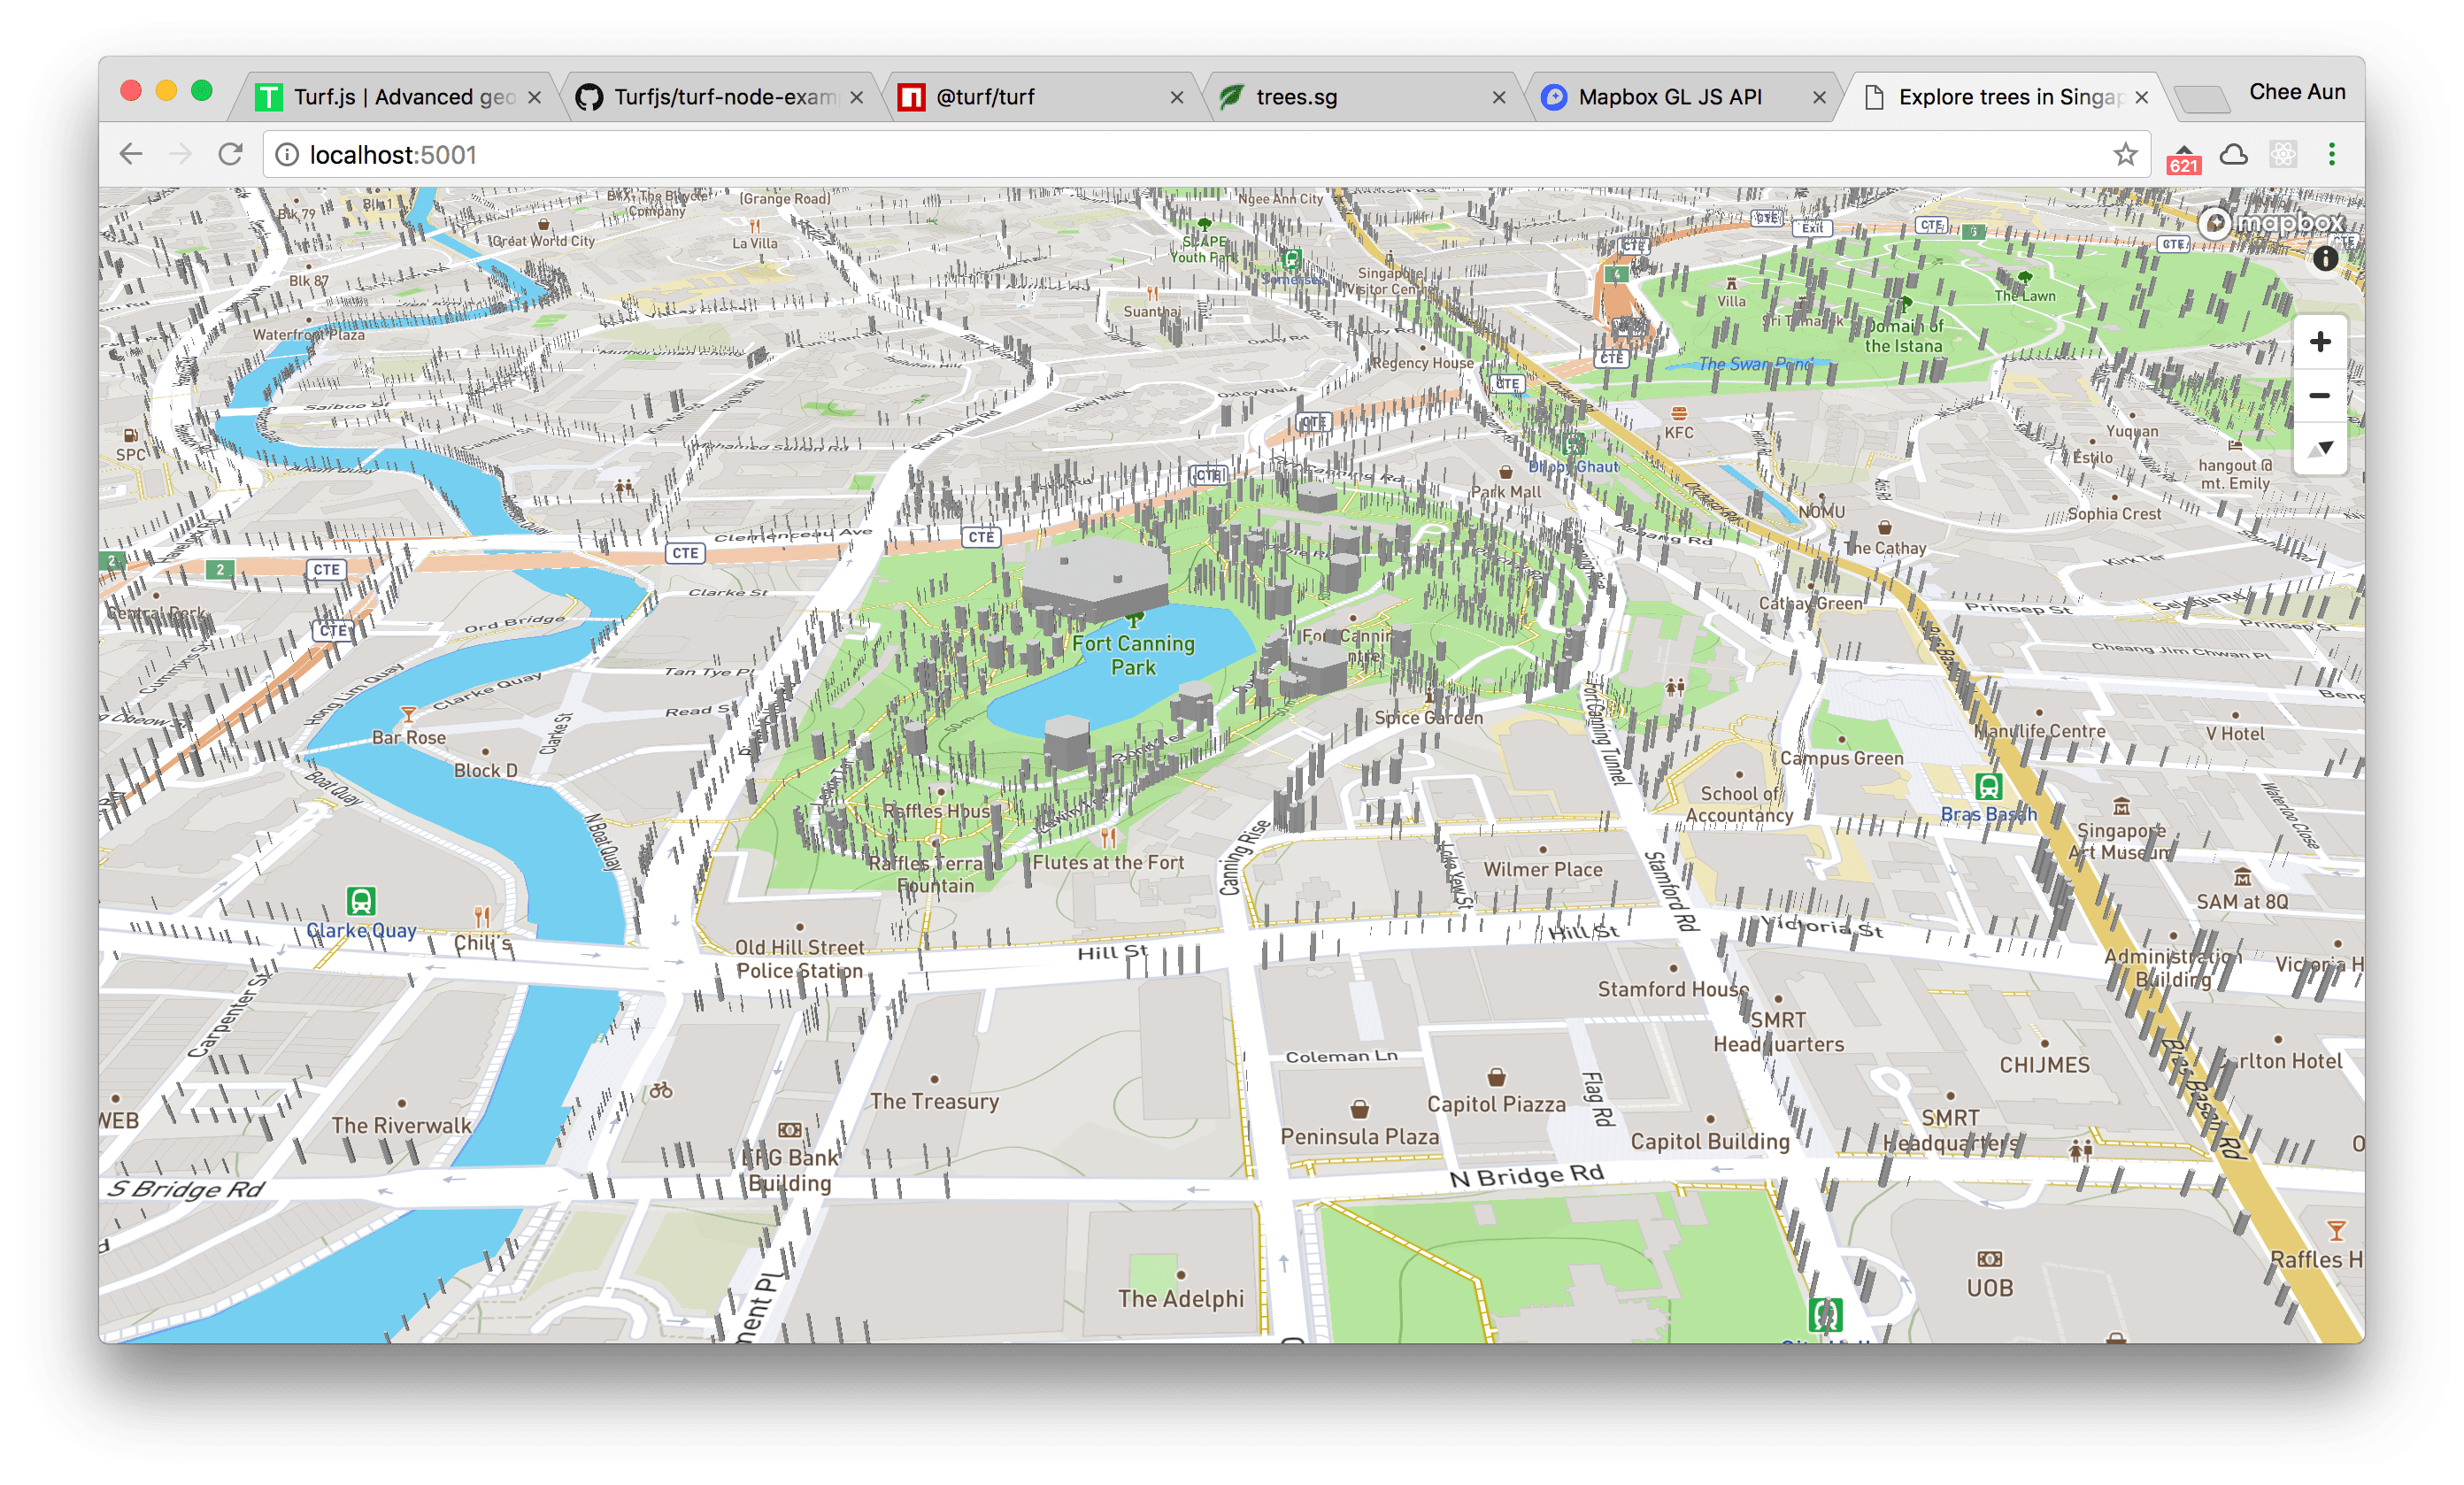 3D trees rendered based on girth and height, on a map, in Singapore